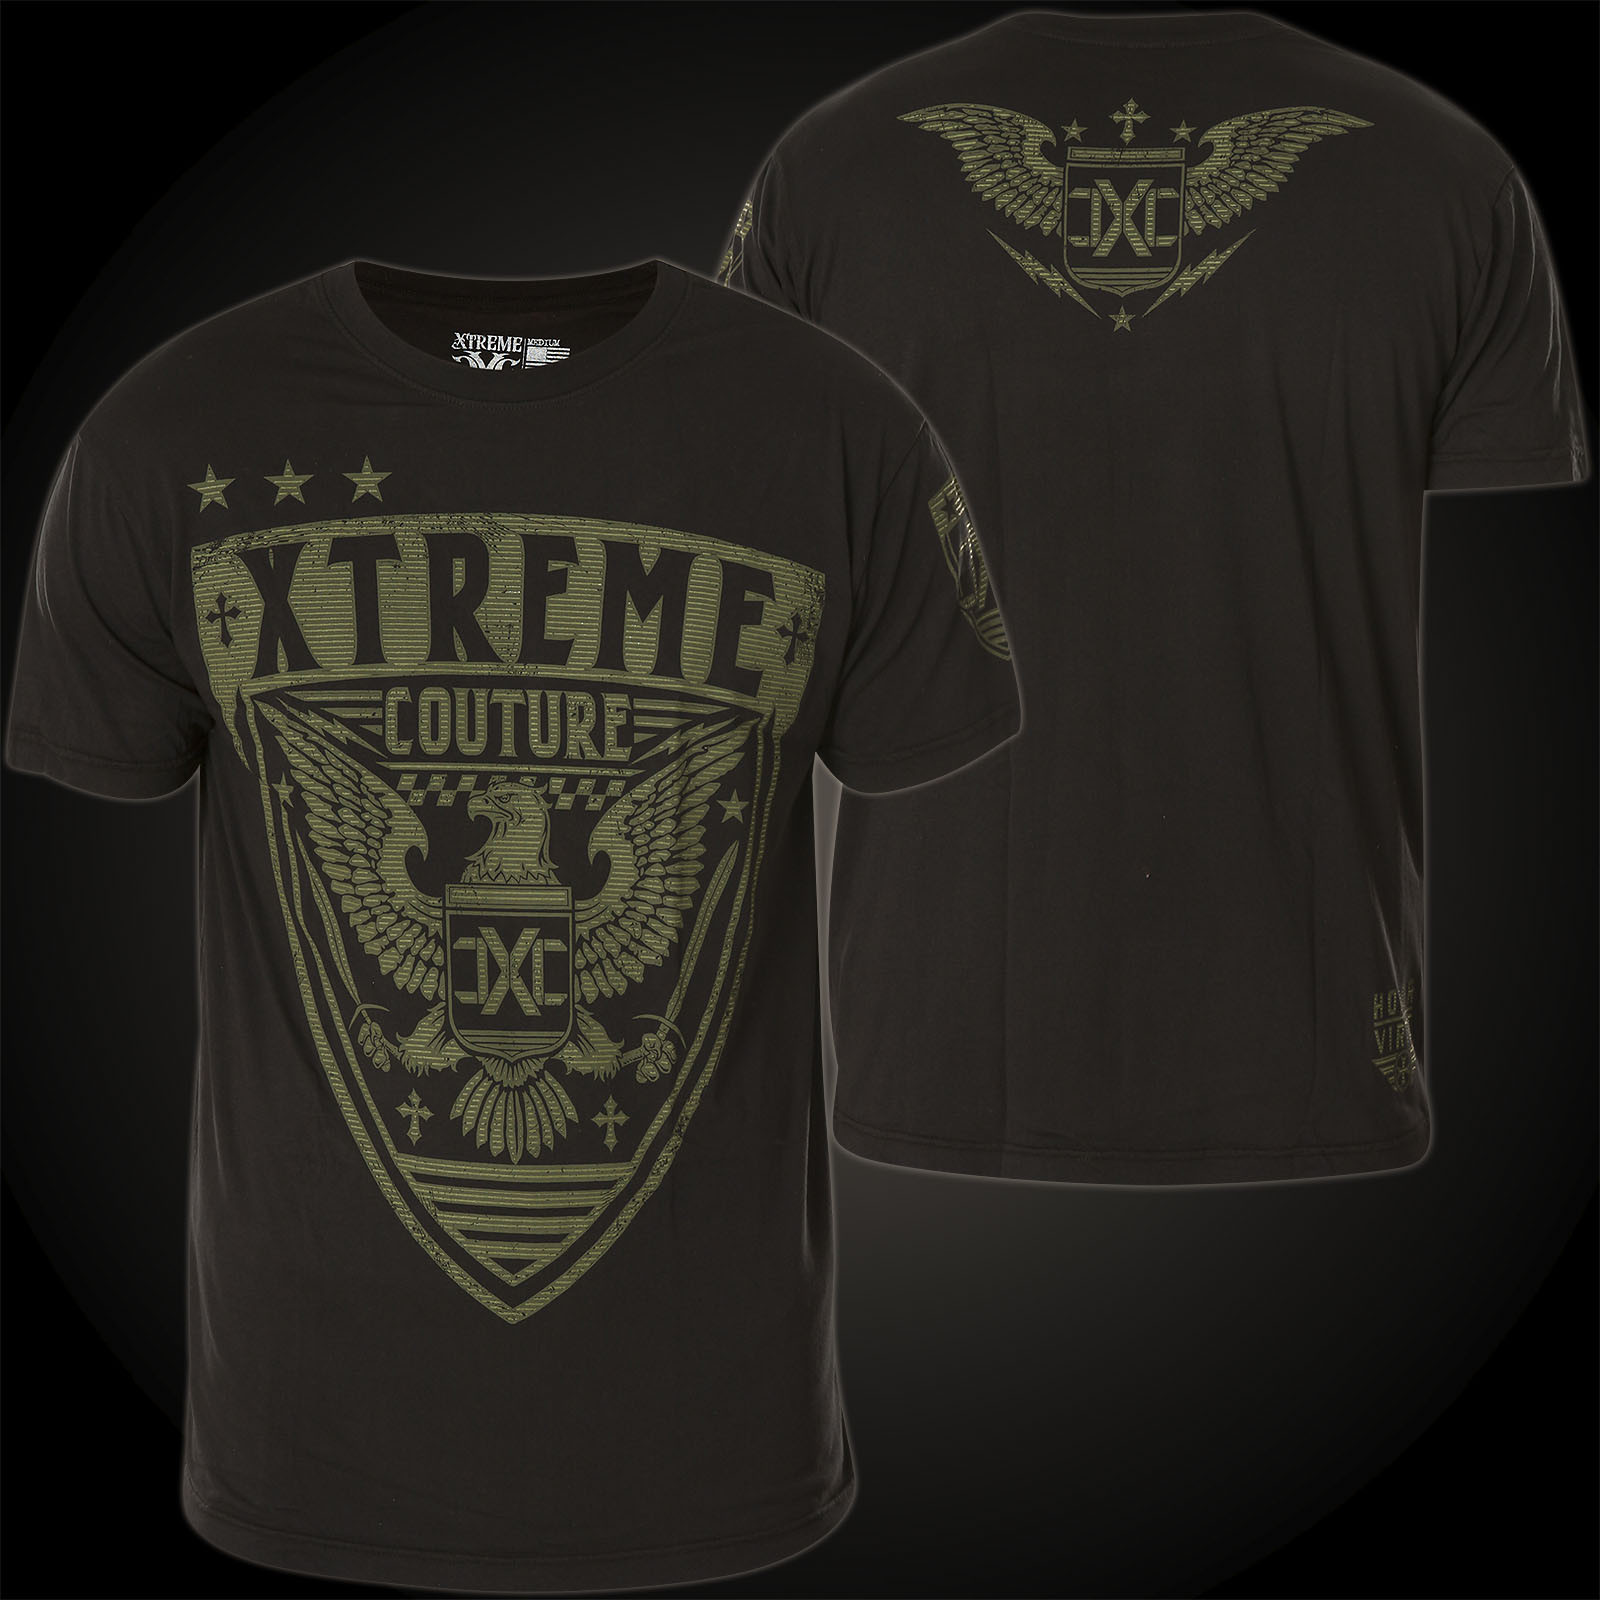 Xtreme Couture by Affliction T-Shirt Superstar with an XC crest